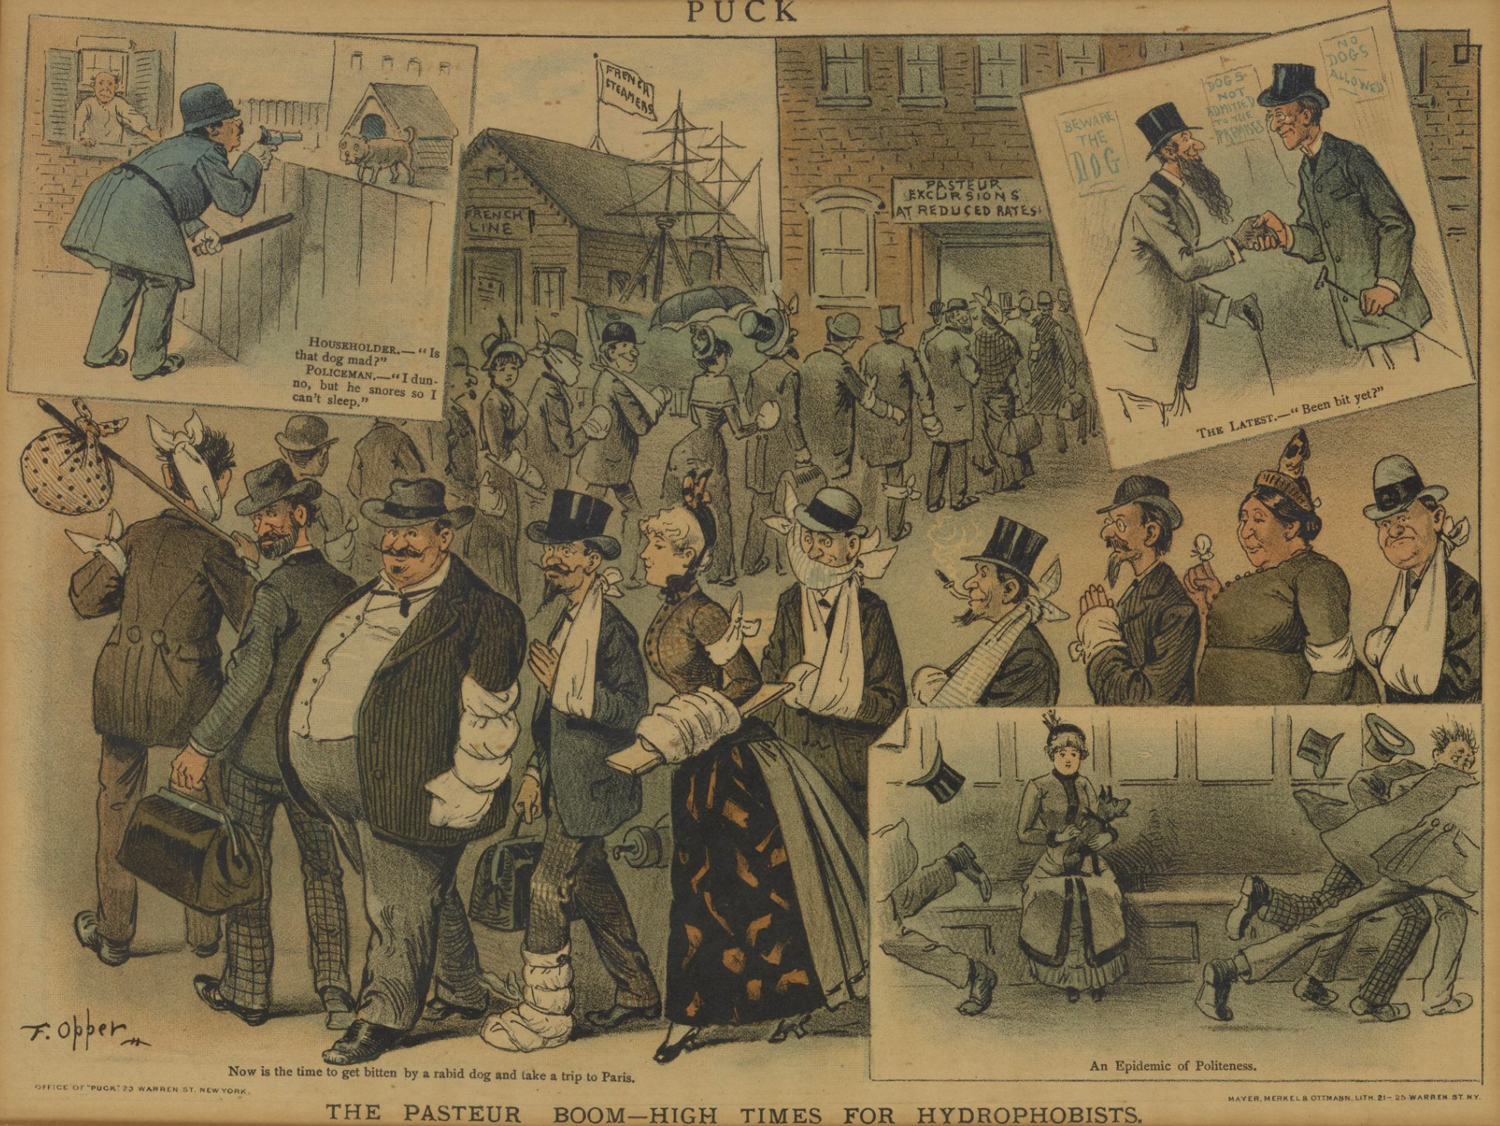 A cartoon from the magazine Puck in 1885 showing people in a line for Louis Pasteur's rabies vaccine